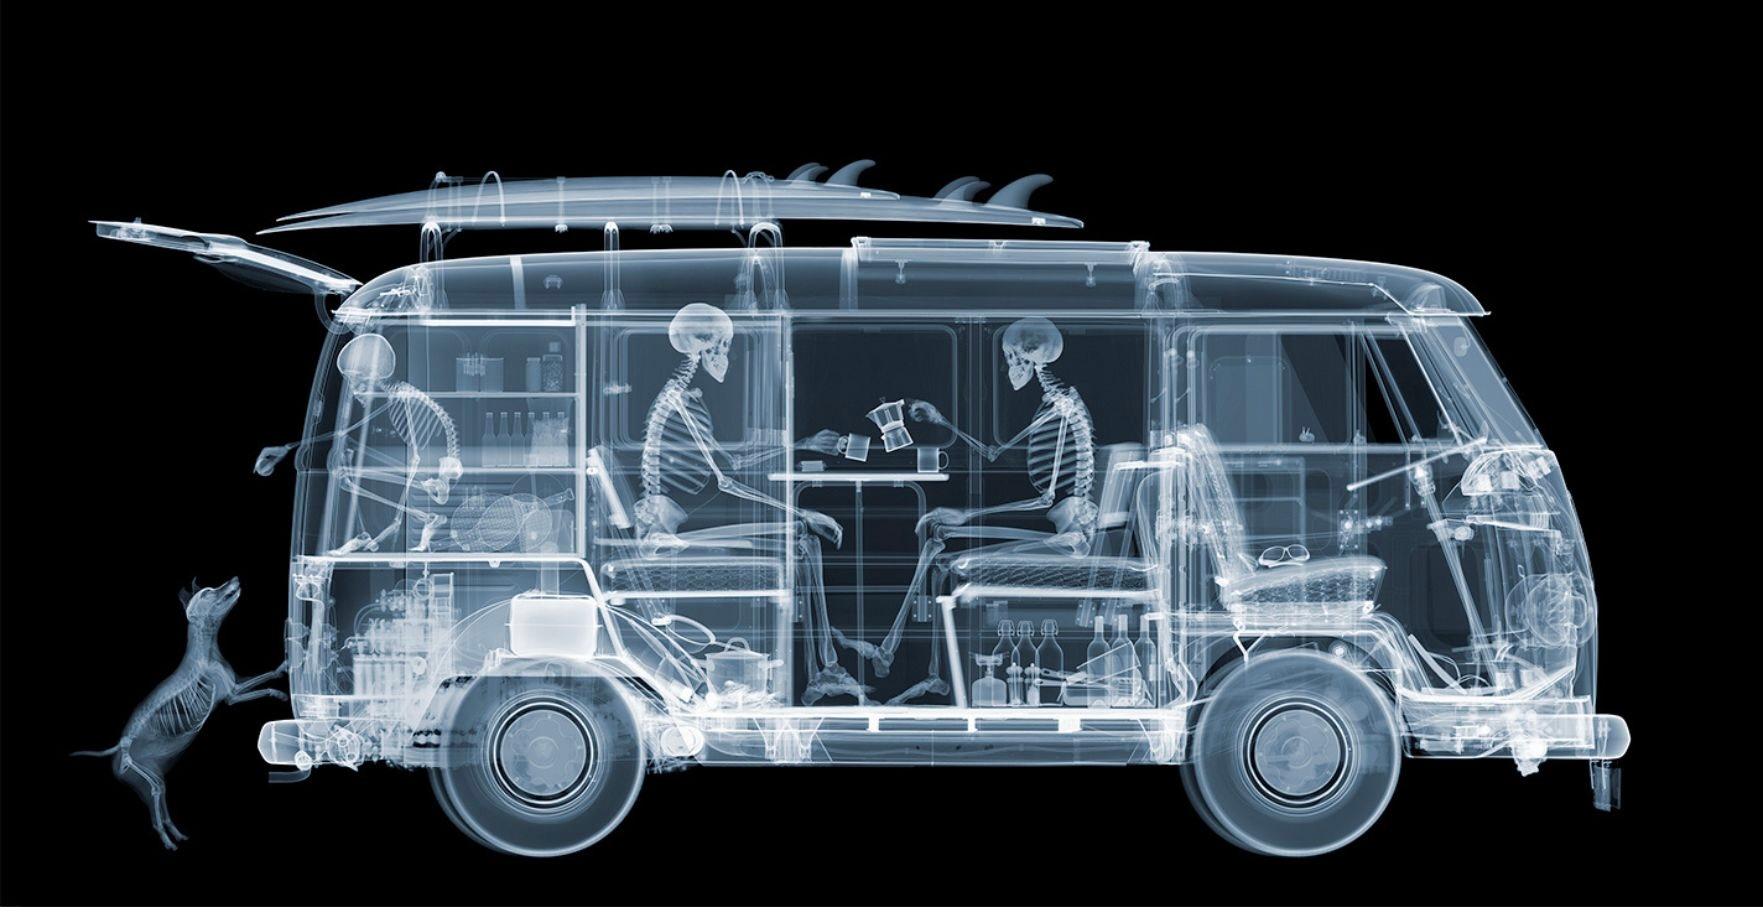 Nick Veasey Figurative Photograph - VW Camper Family 